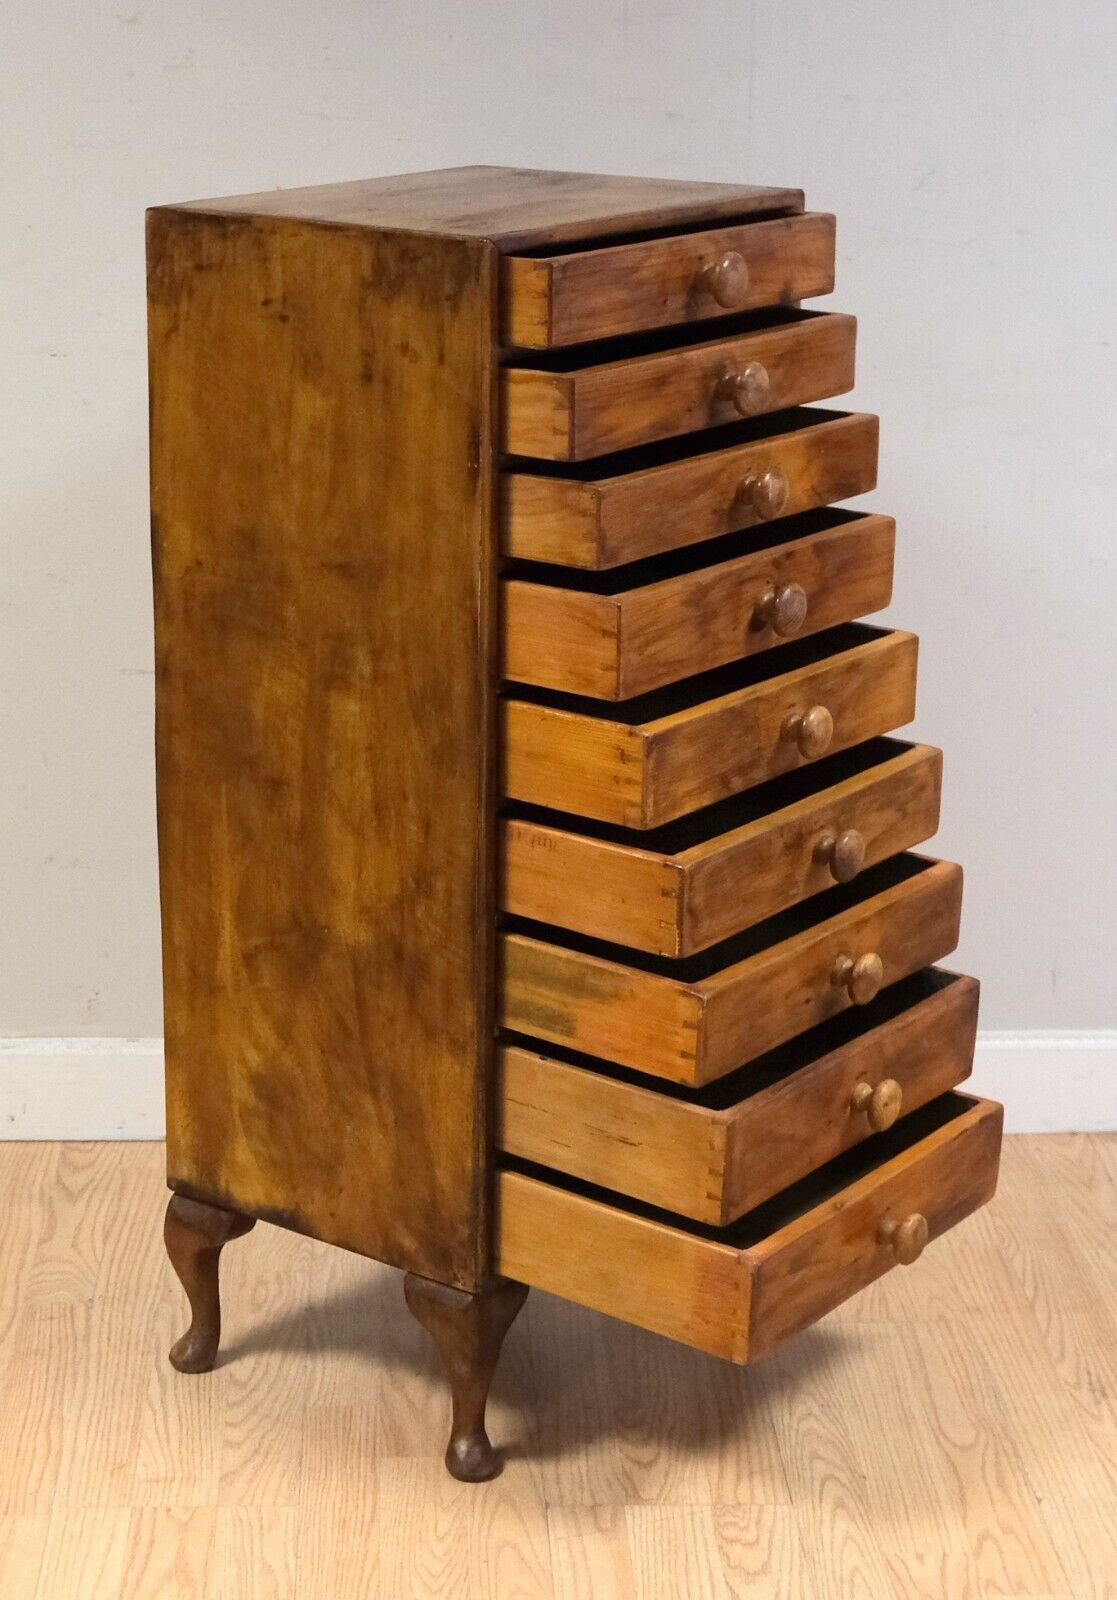 Hand-Crafted Lovely Early 20th Century Tallboy Bank of Drawers and Queen Ann Style Legs